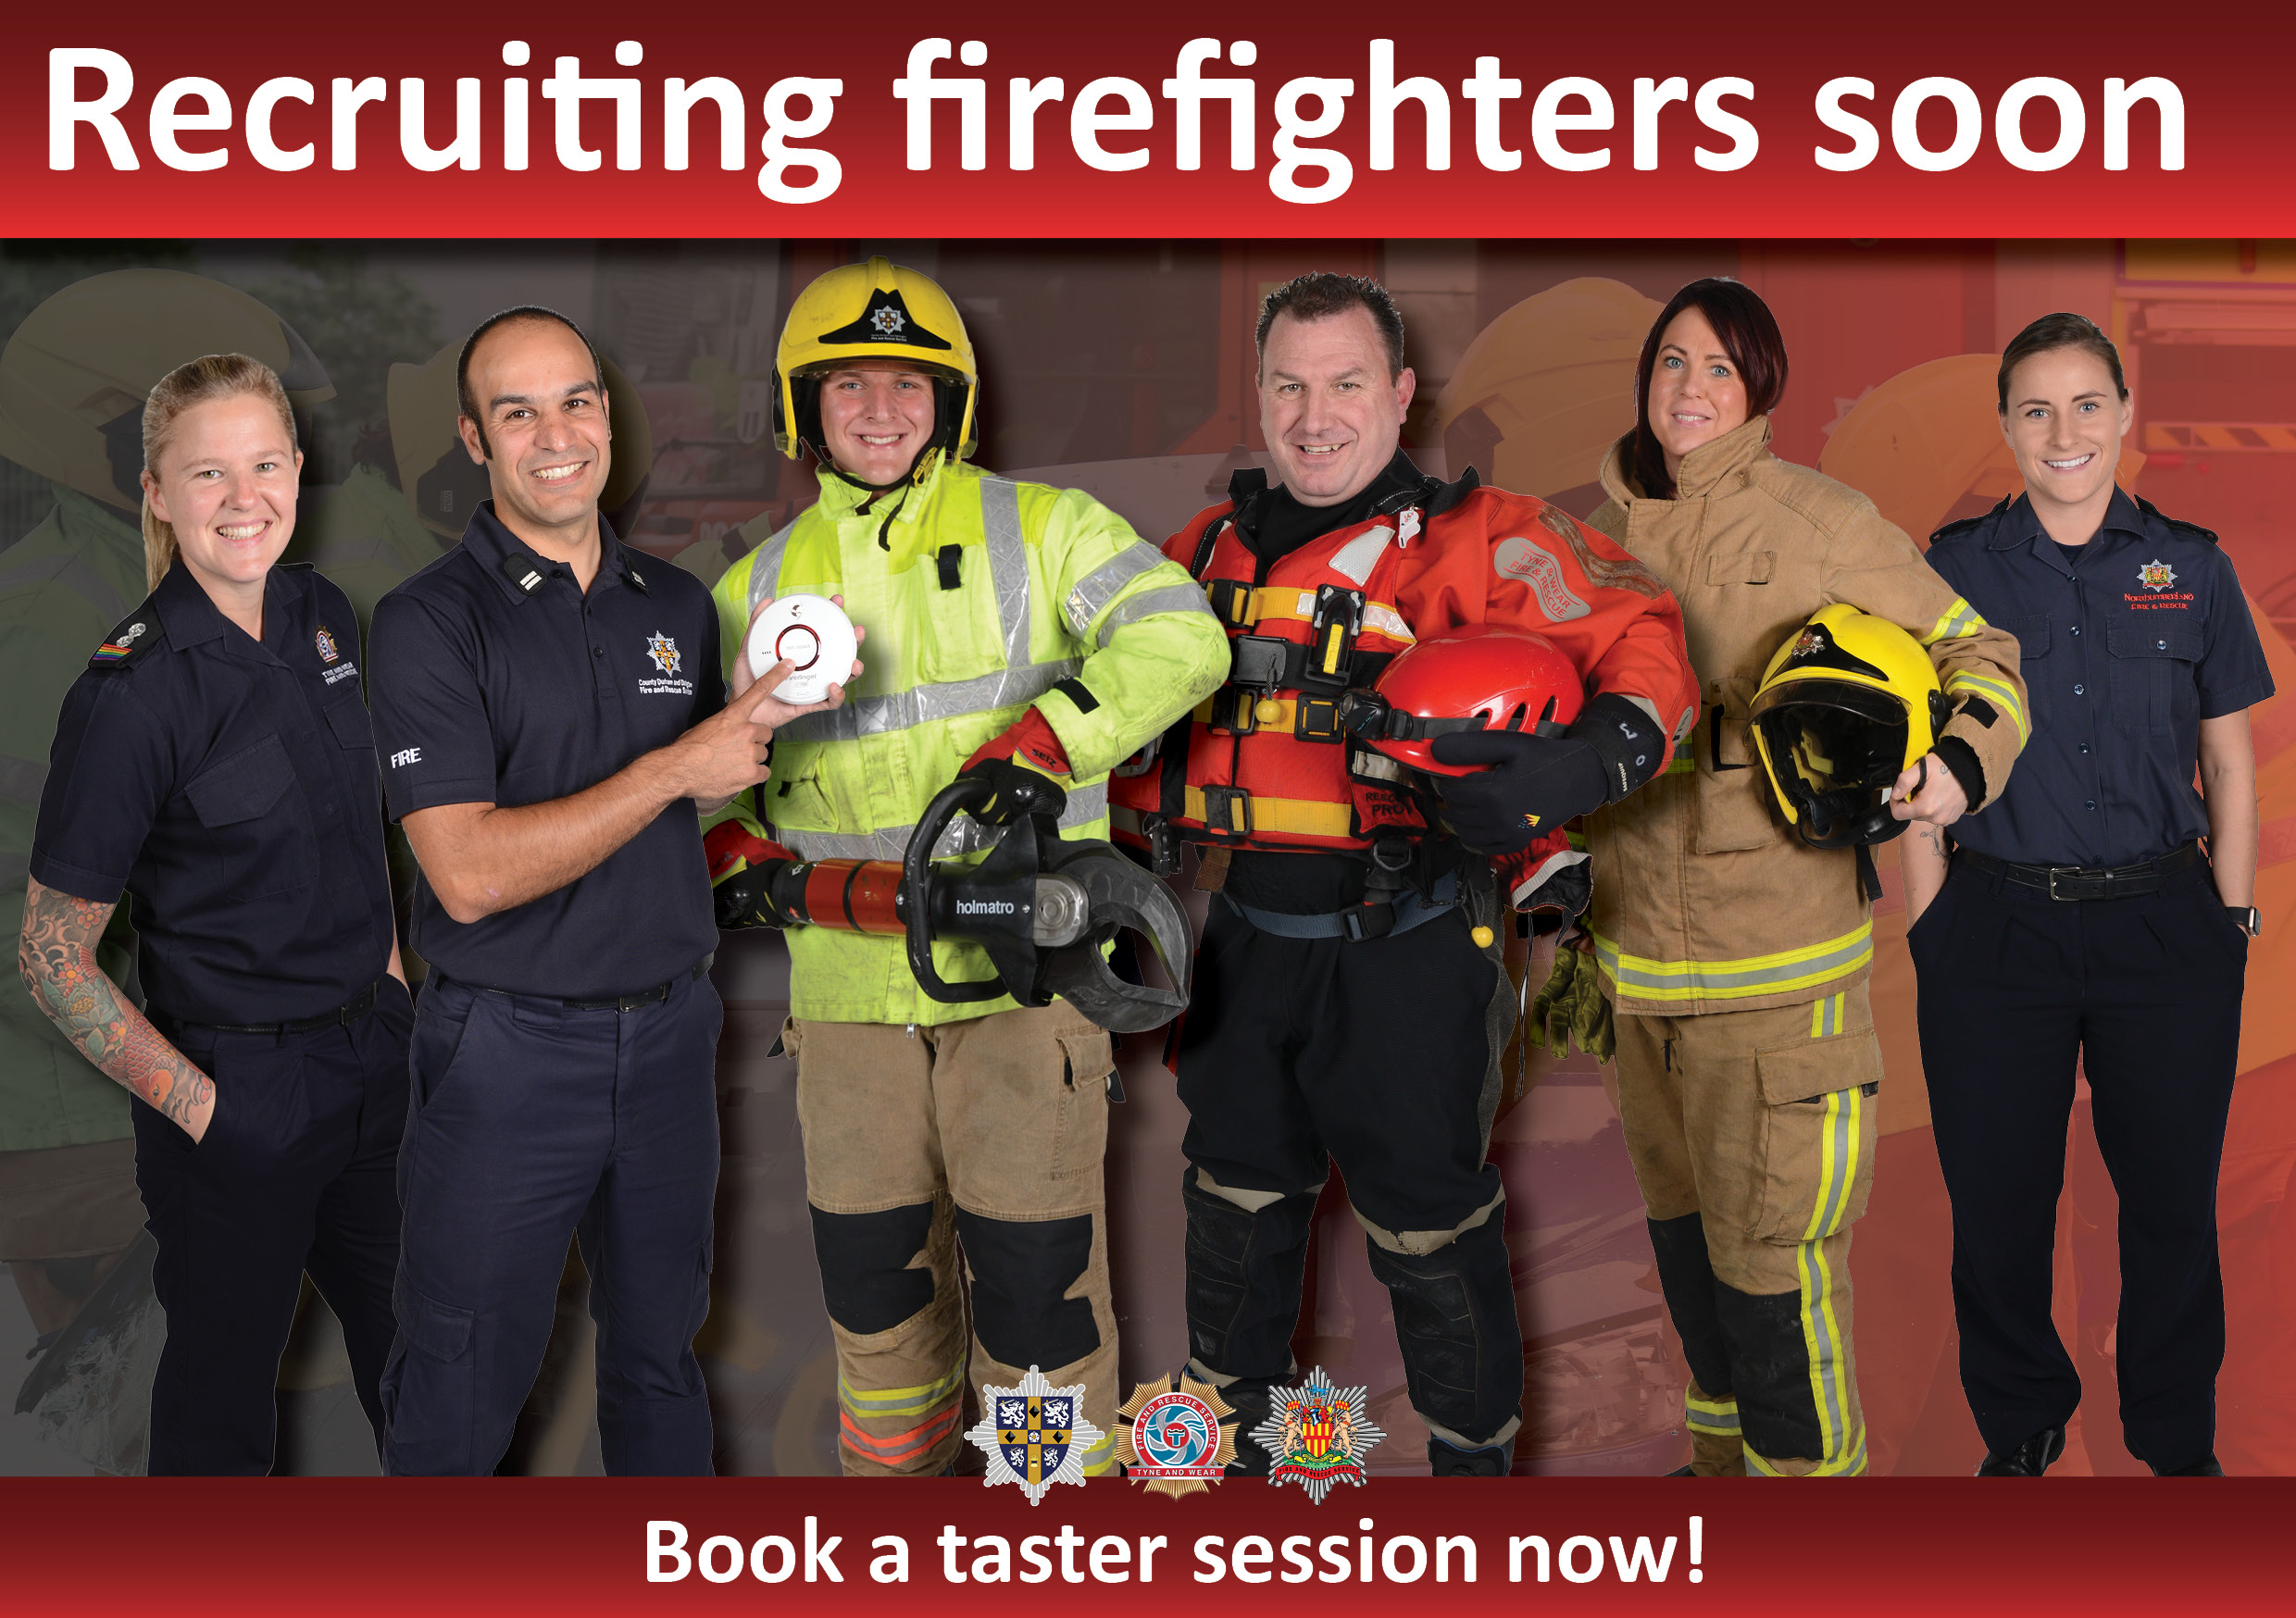 Recruiting firefighters soon - book a taster session now